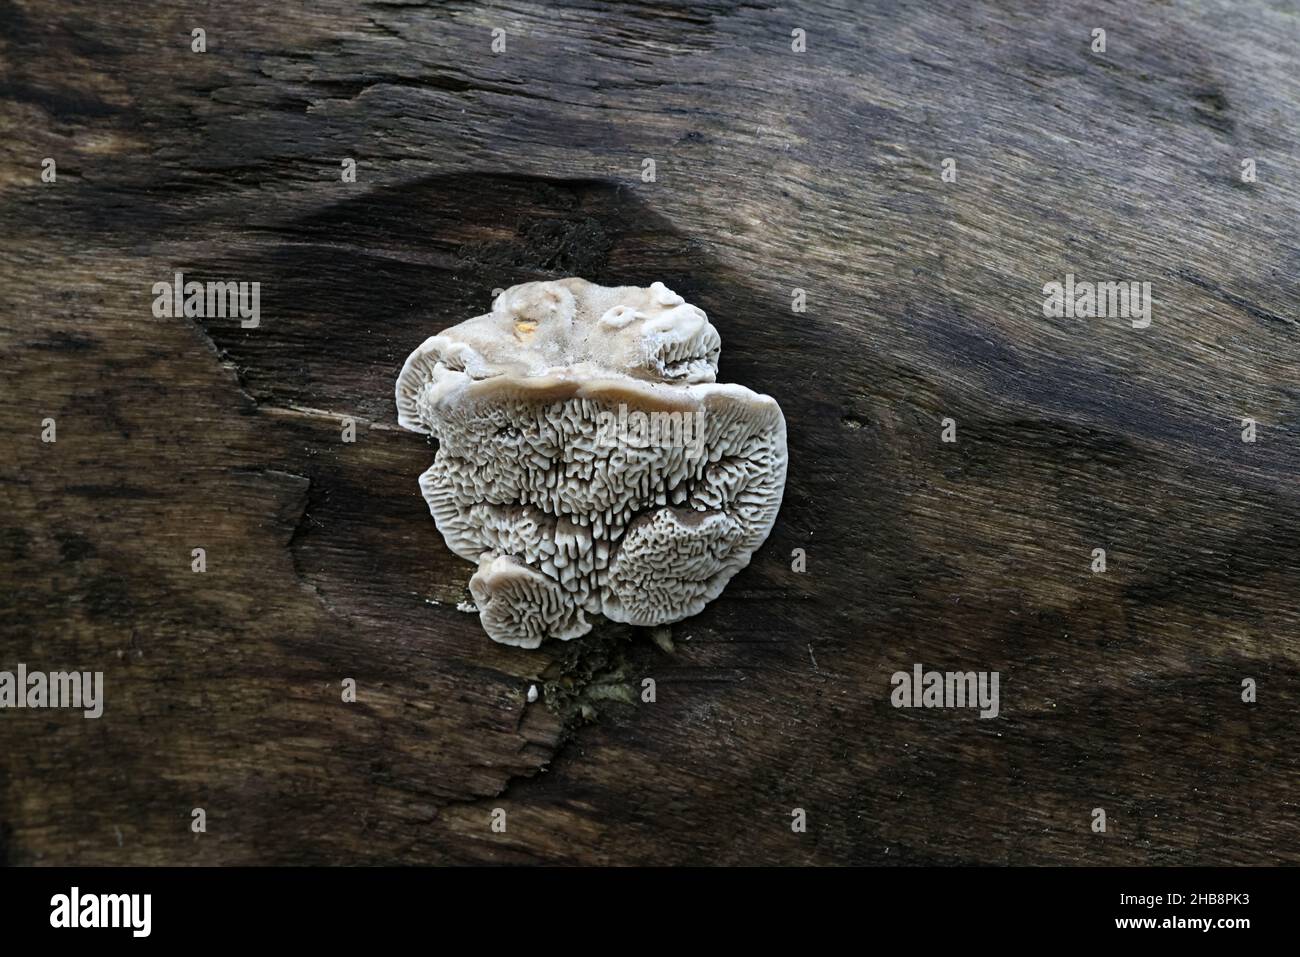 Daedalea quercina, known as the oak mazegill or maze-gill fungus, wild polypore from Finand Stock Photo